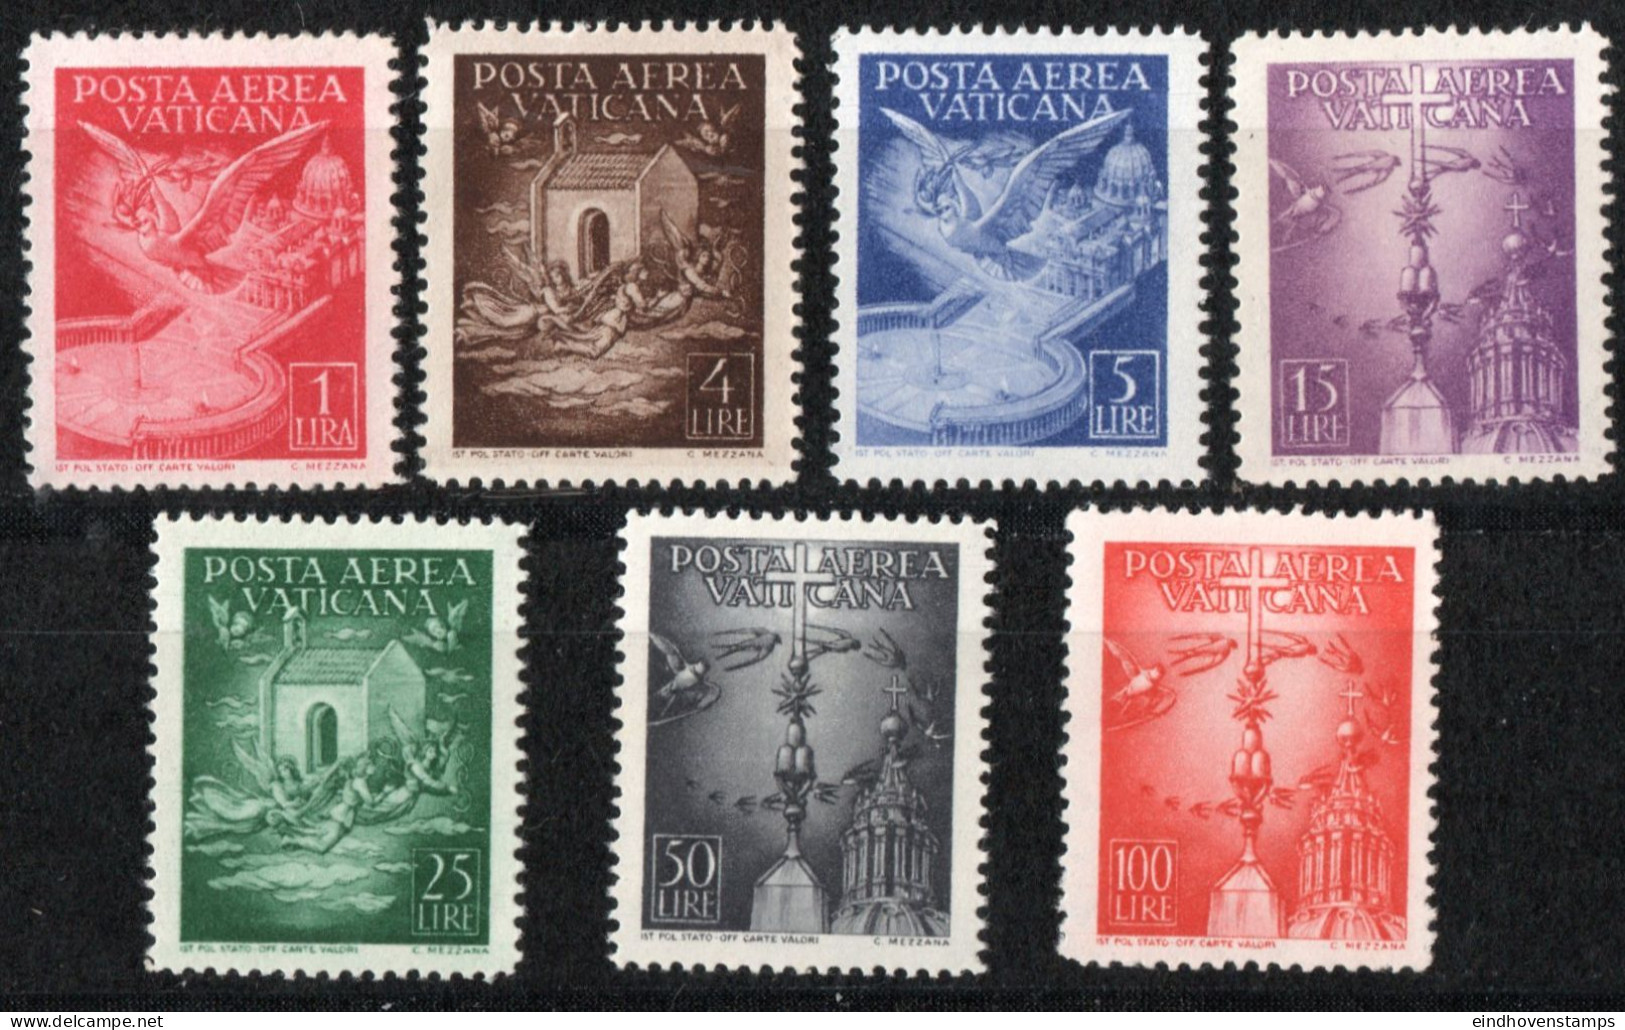 Vatican 1947 Airmail Stamps 7 Values MNH Dove Over St Pieter Dome, Swallows, Angels Bringin Casa Sancta - Unused Stamps